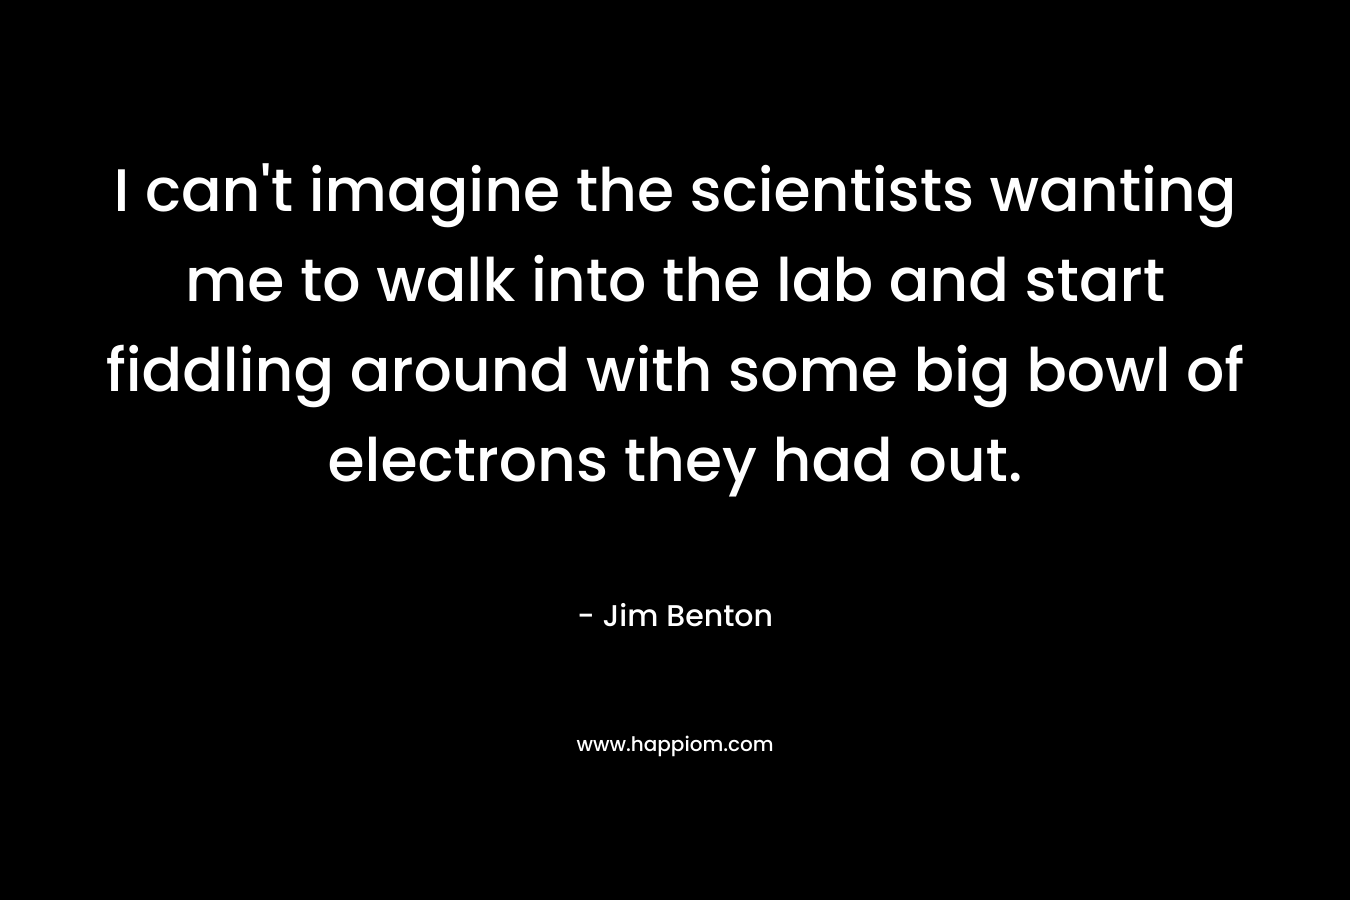 I can't imagine the scientists wanting me to walk into the lab and start fiddling around with some big bowl of electrons they had out.